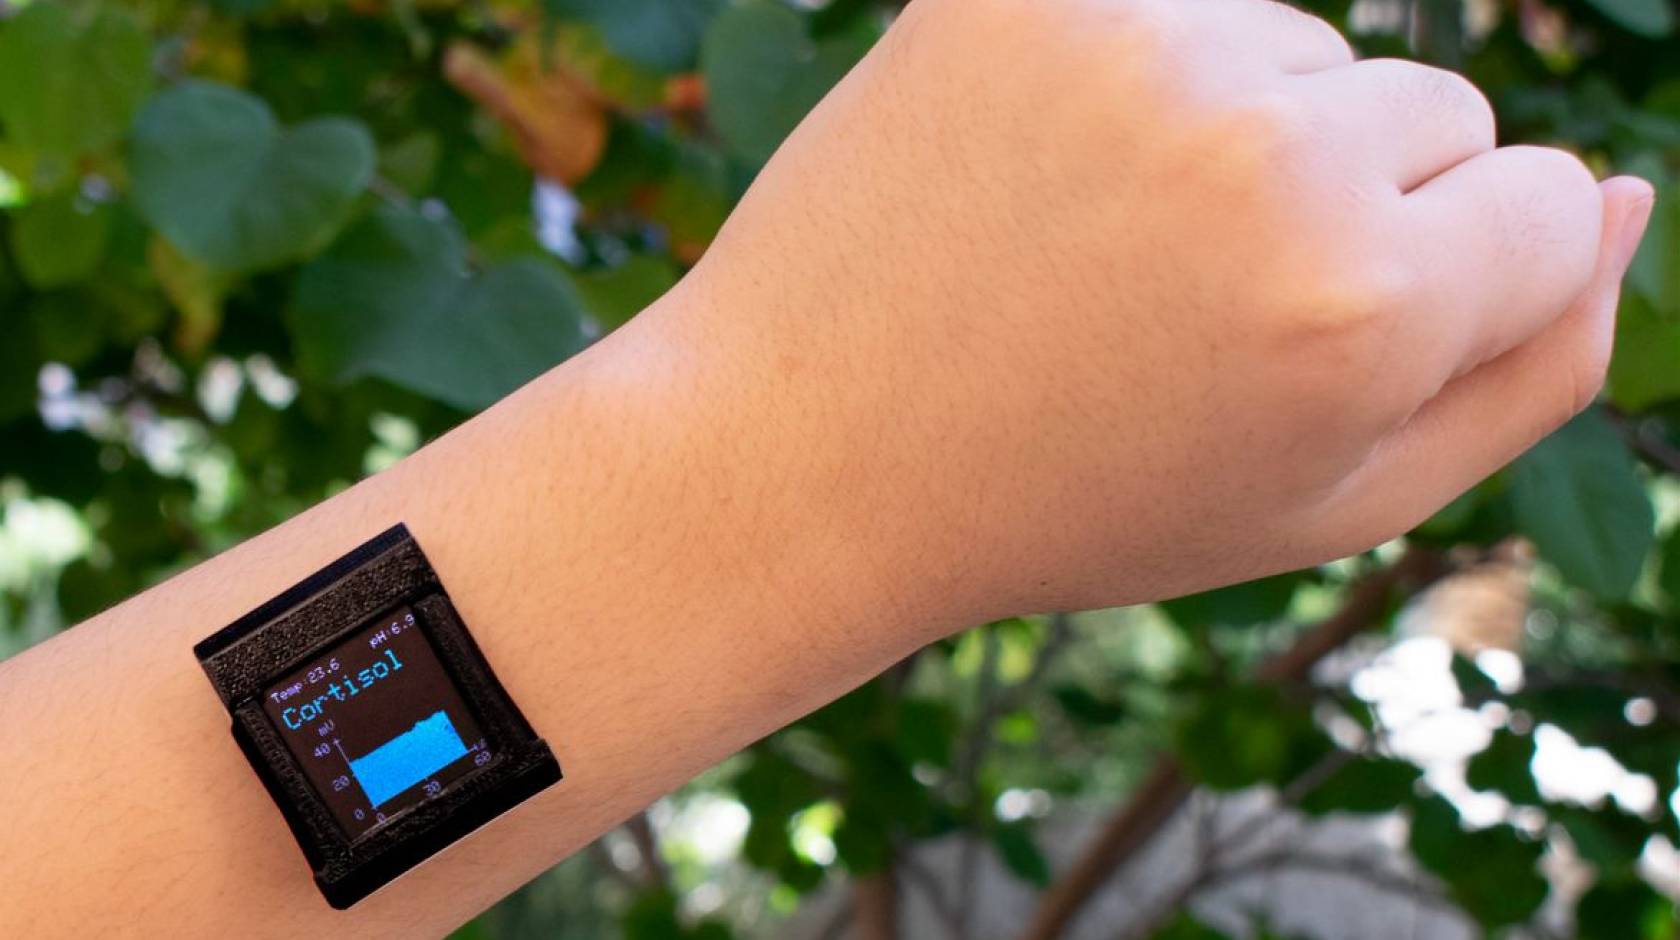 A smart watch on a wrist with cortisol reading displayed